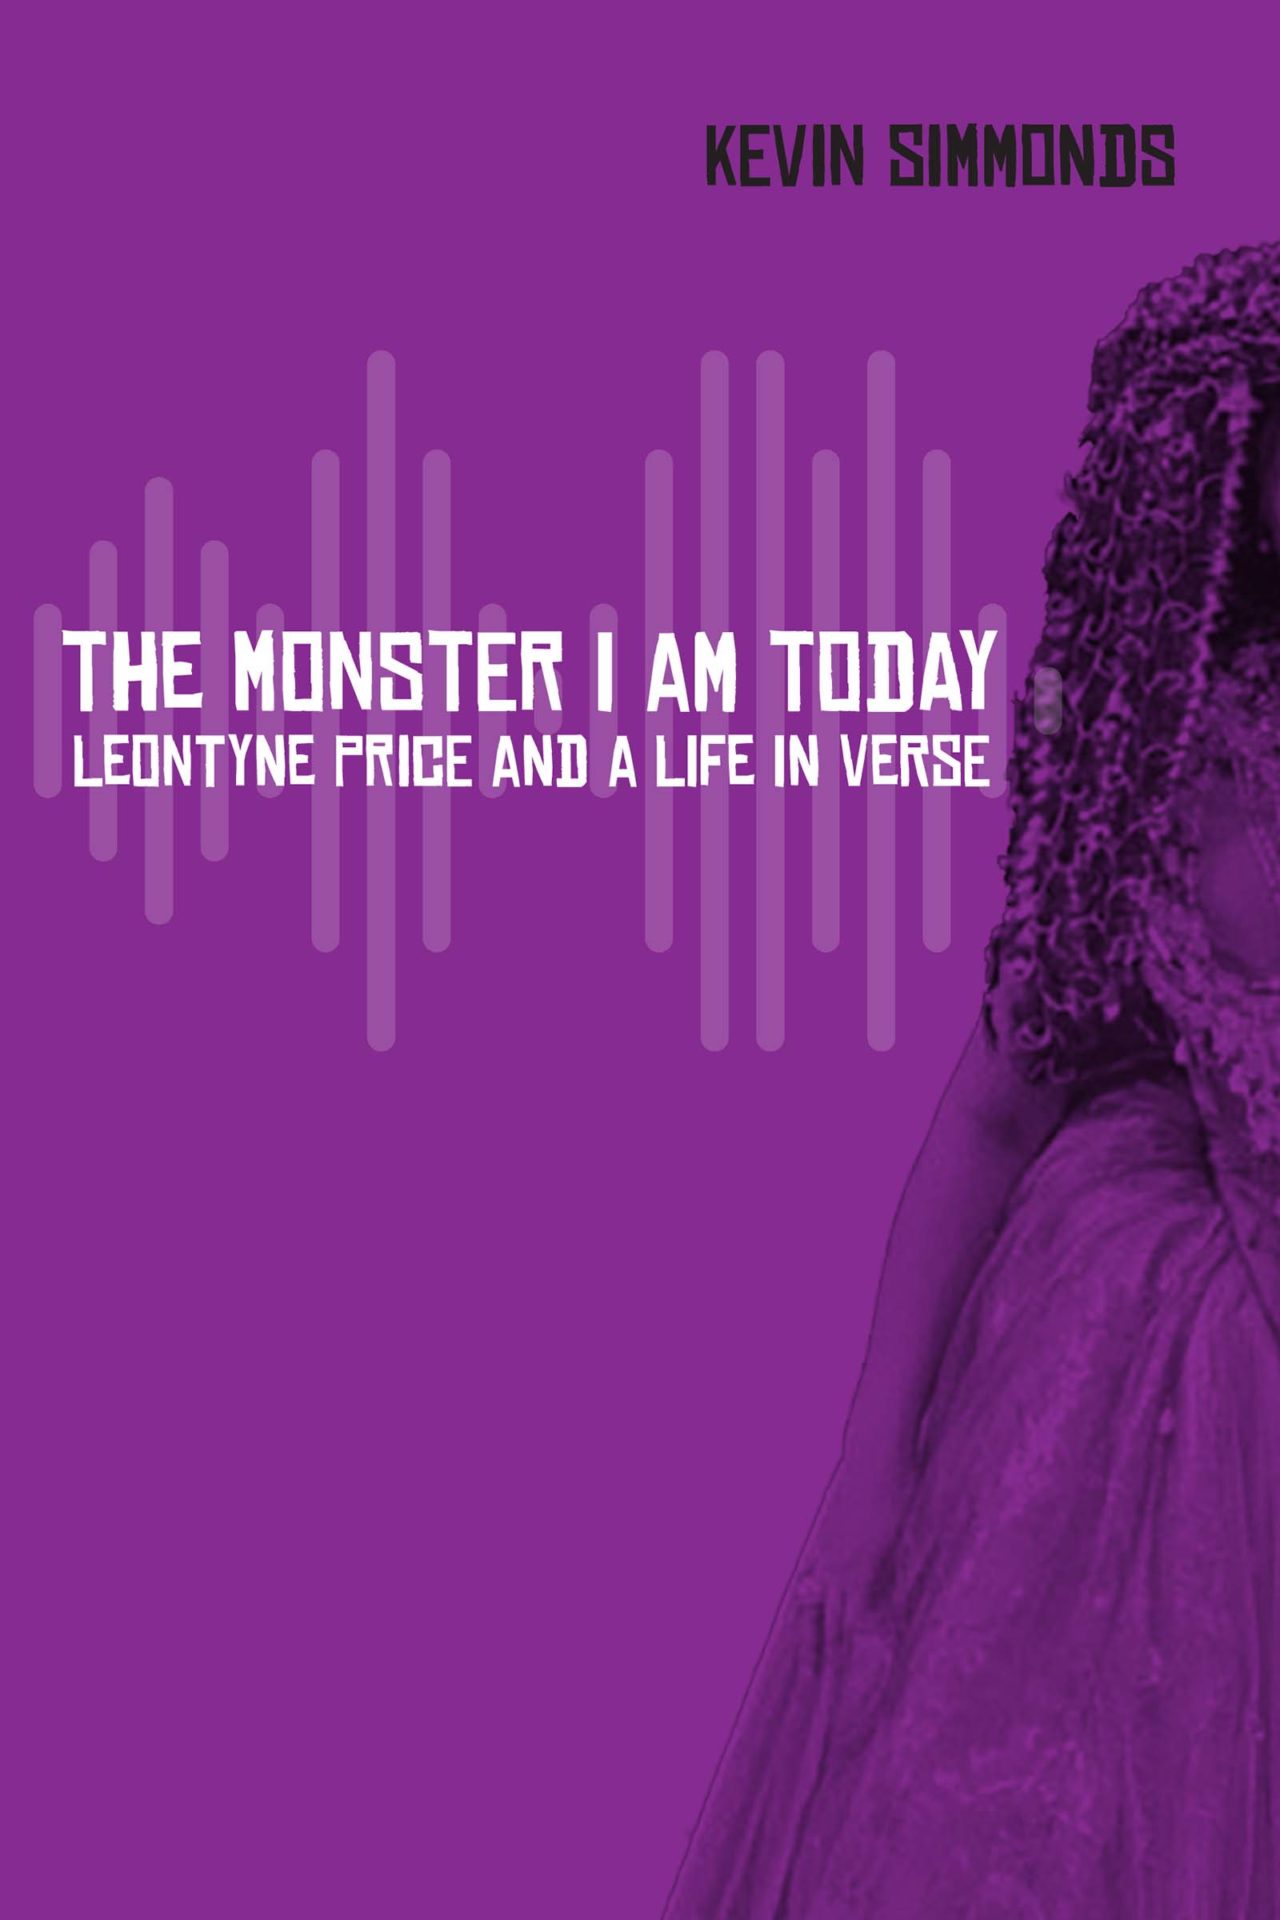 A cover of Kevin Simmond's The Monster I am Today, featuring a purple background with the name of the text in white on the top middle left aligned.